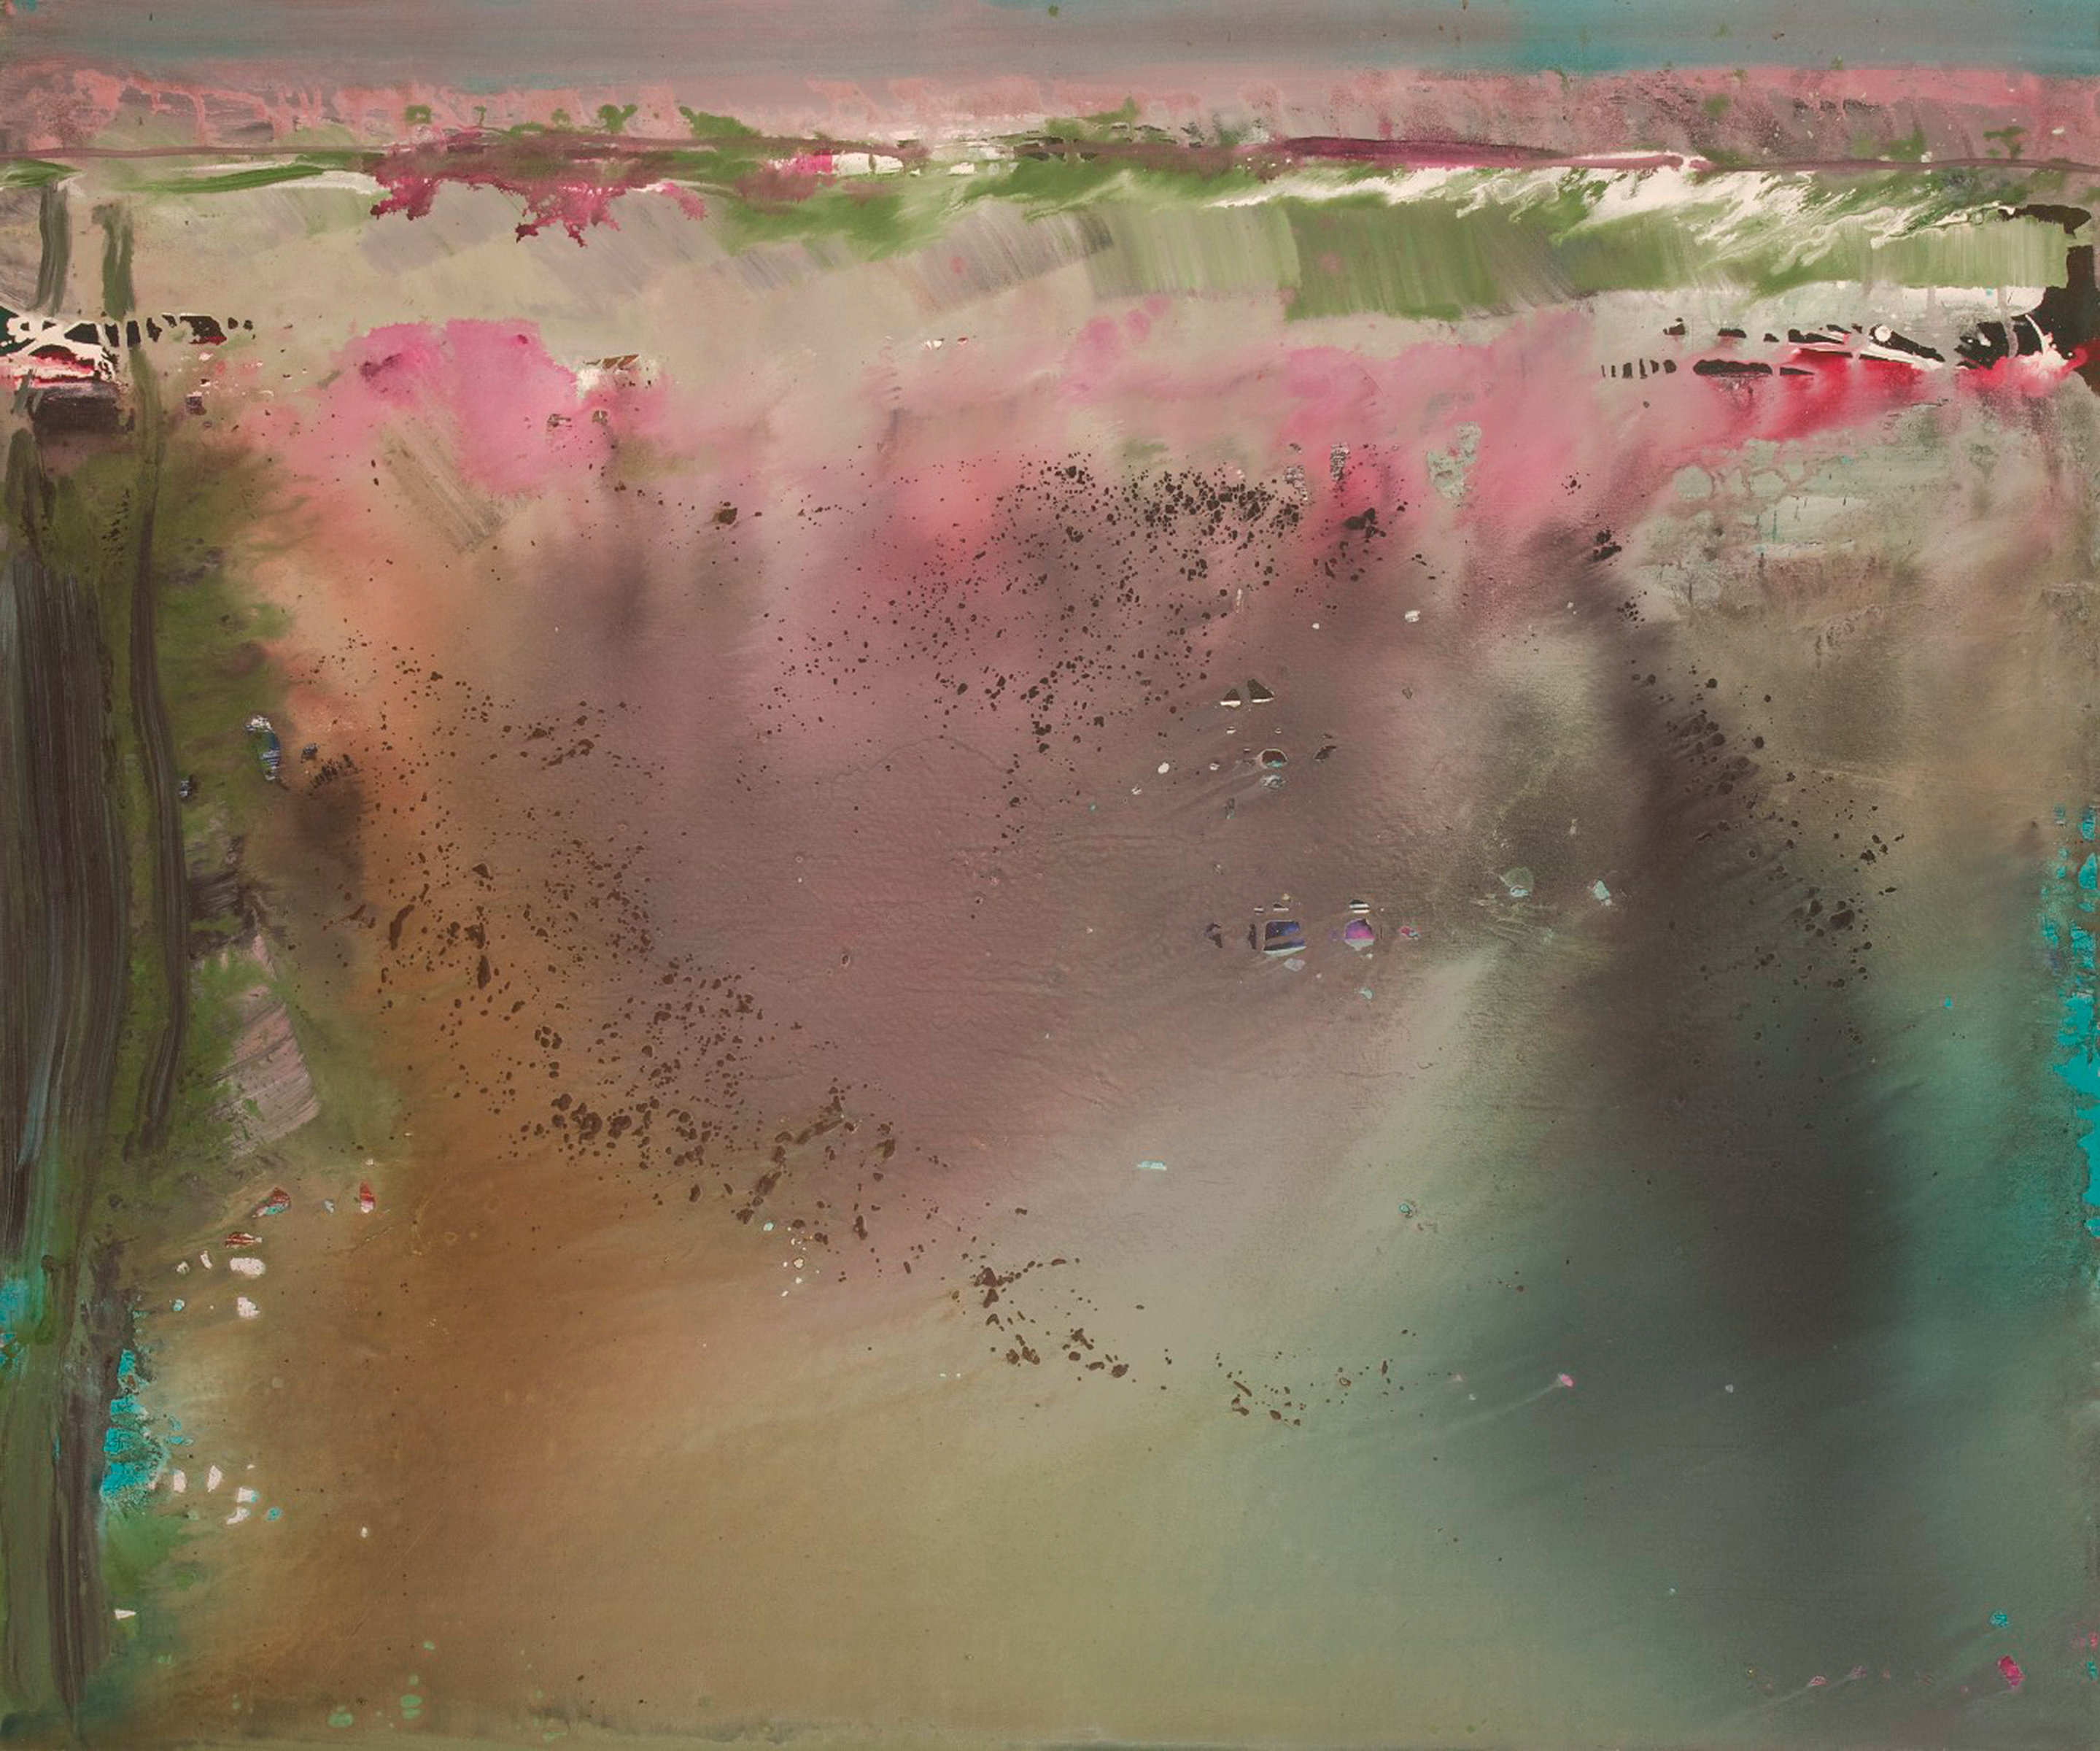 Image of Po Kim, Untitled, 1958, oil on canvas, 60 x 72 in